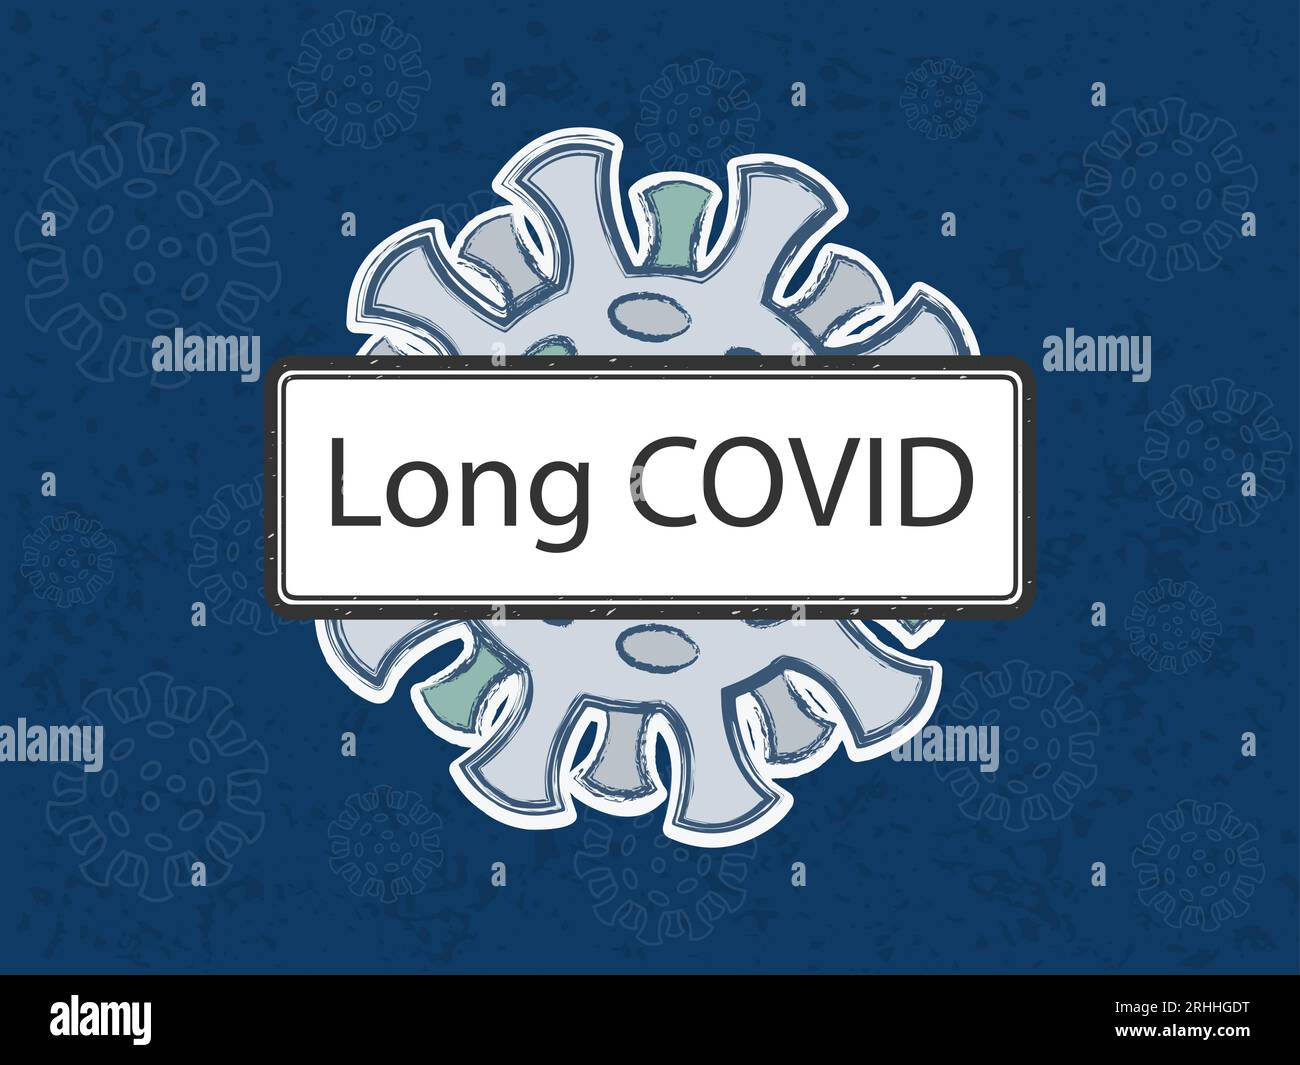 Long COVID written in the sign. Coronovirus with different colored spike proteins in the background. Dark blue background with pale viruses around. Stock Vector